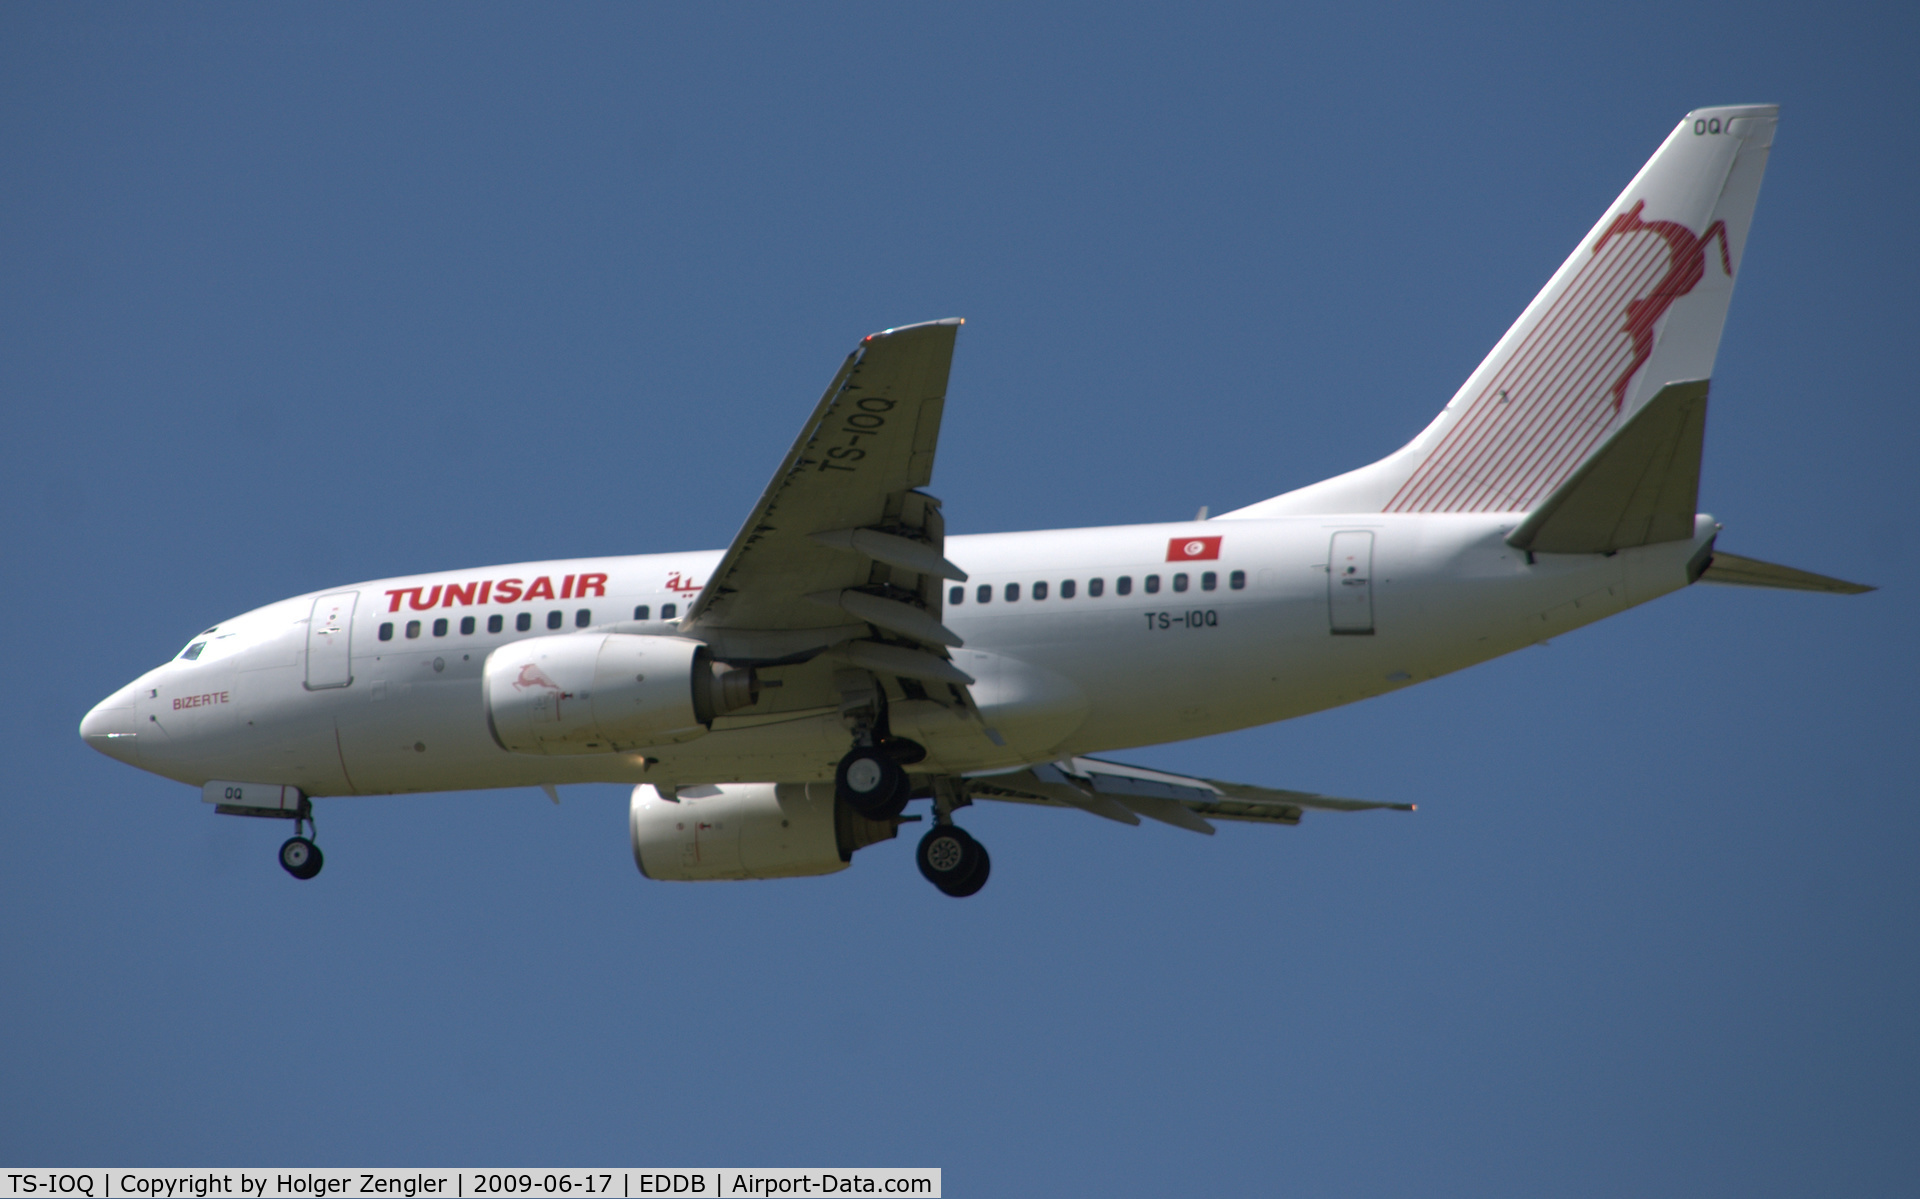 TS-IOQ, 2000 Boeing 737-6H3 C/N 29501, Arrival from North Africa